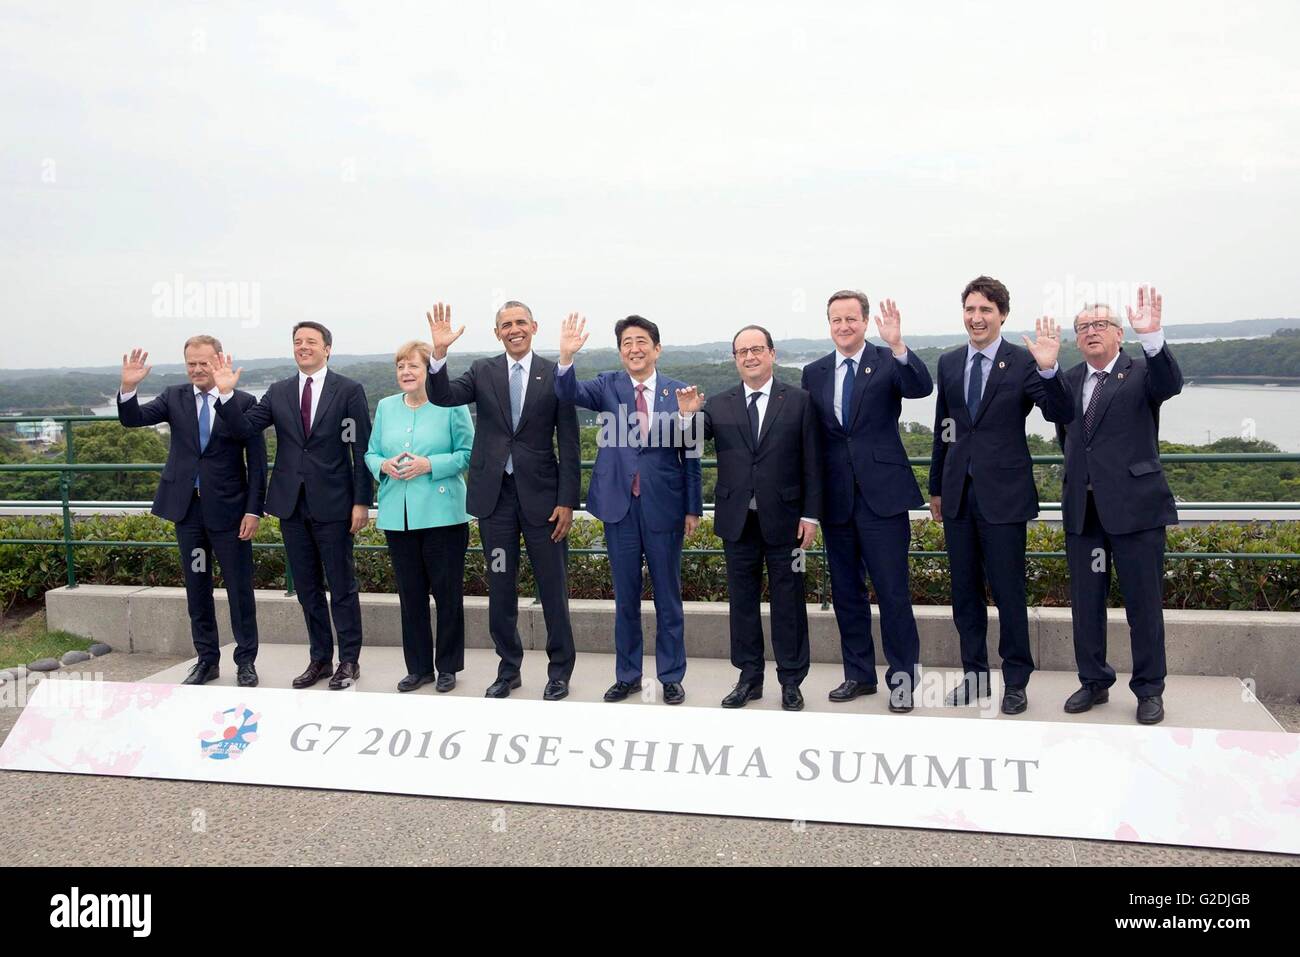 World leaders at the G7 Summit meeting wave during for a group photo on the roof garden of the Shima Kanko Hotel May 26, 2016 in Shima, Mie Prefecture, Japan. Left to Right: European Council President Donald Tusk, Italian Prime Minister Matteo Renzi, German Chancellor Angela Merkel, U.S President Barack Obama, Japanese Prime Minister Shinzo Abe, French President Francois Hollande, British Prime Minister David Cameron, Canadian Prime Minister Justin Trudeau, and European Commission President Jean-Claude Juncker. Stock Photo